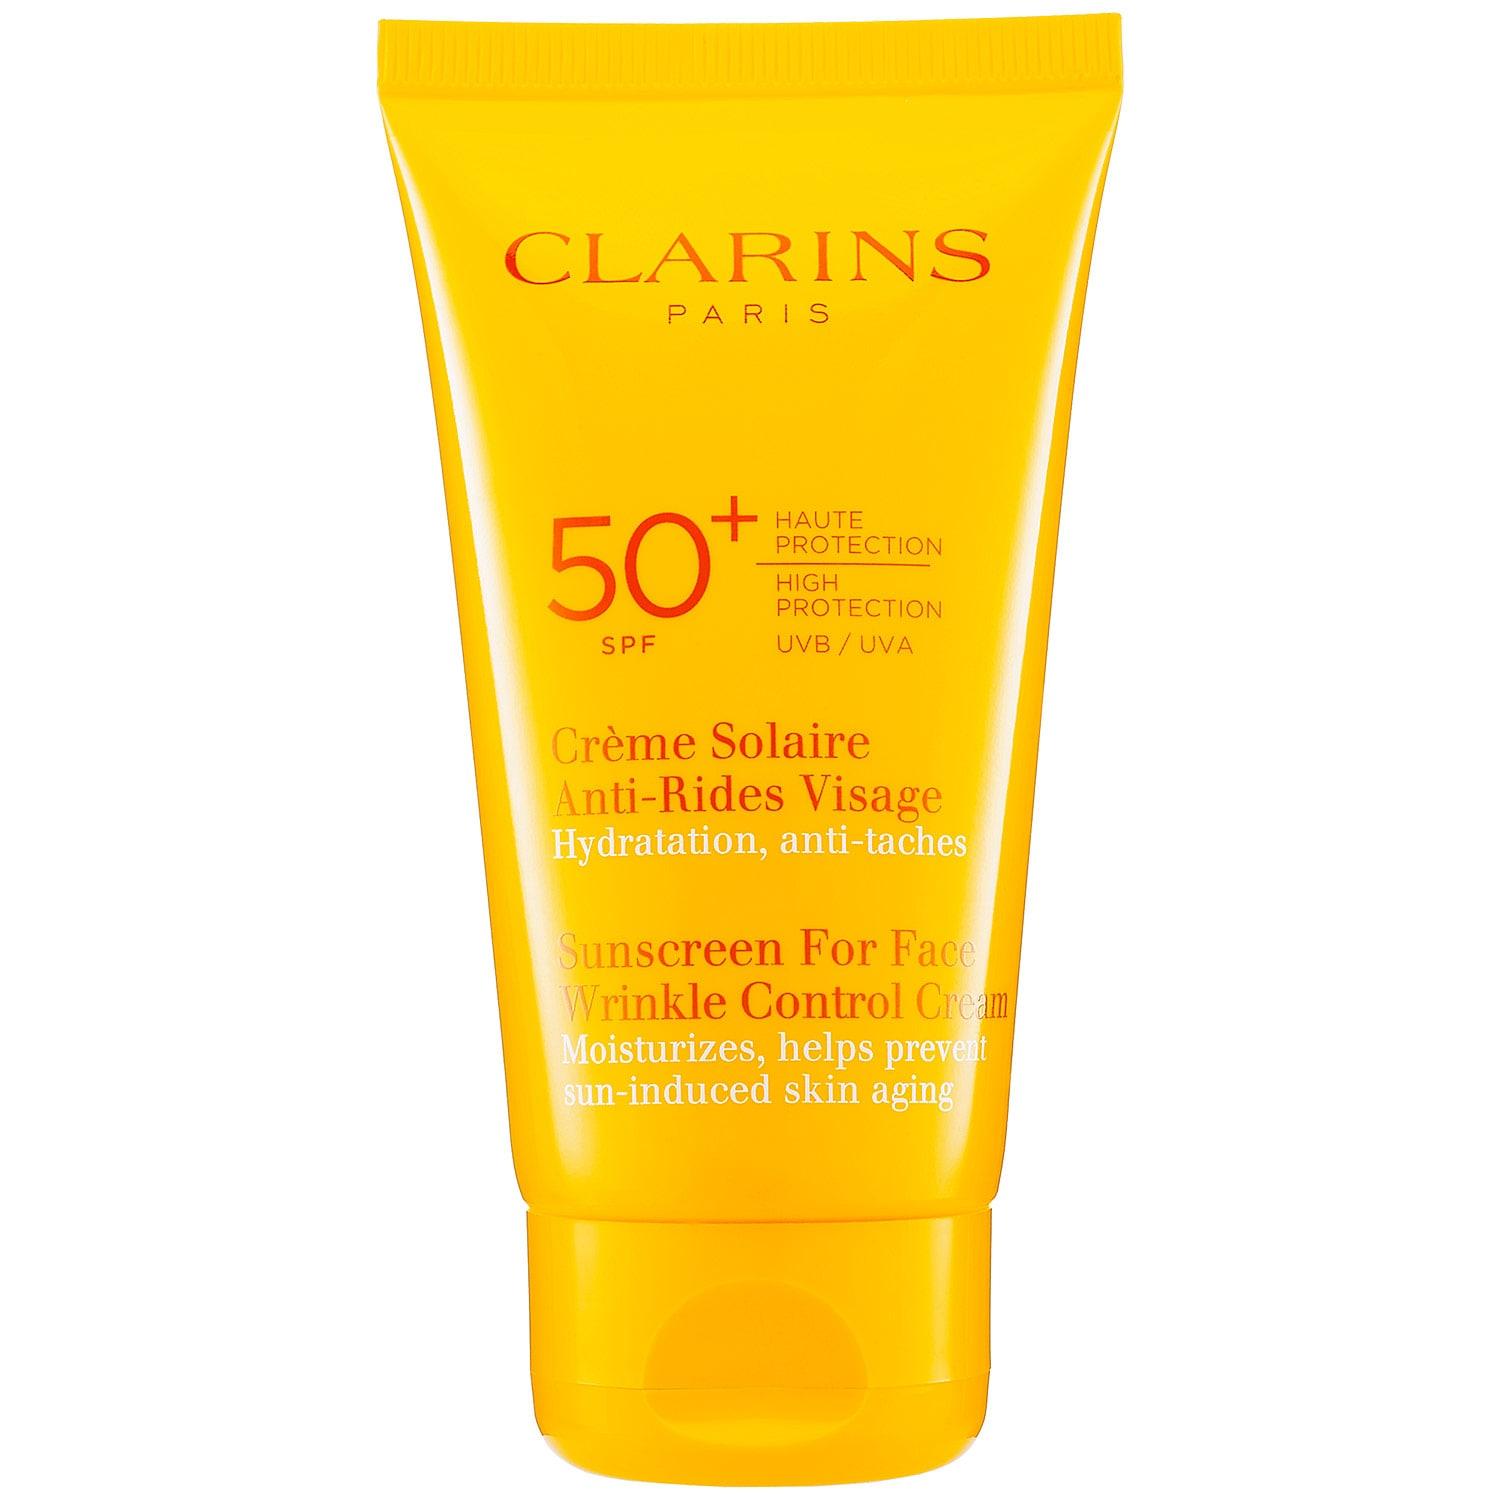 Sunscreen for Face Wrinkle Control Cream SPF 50